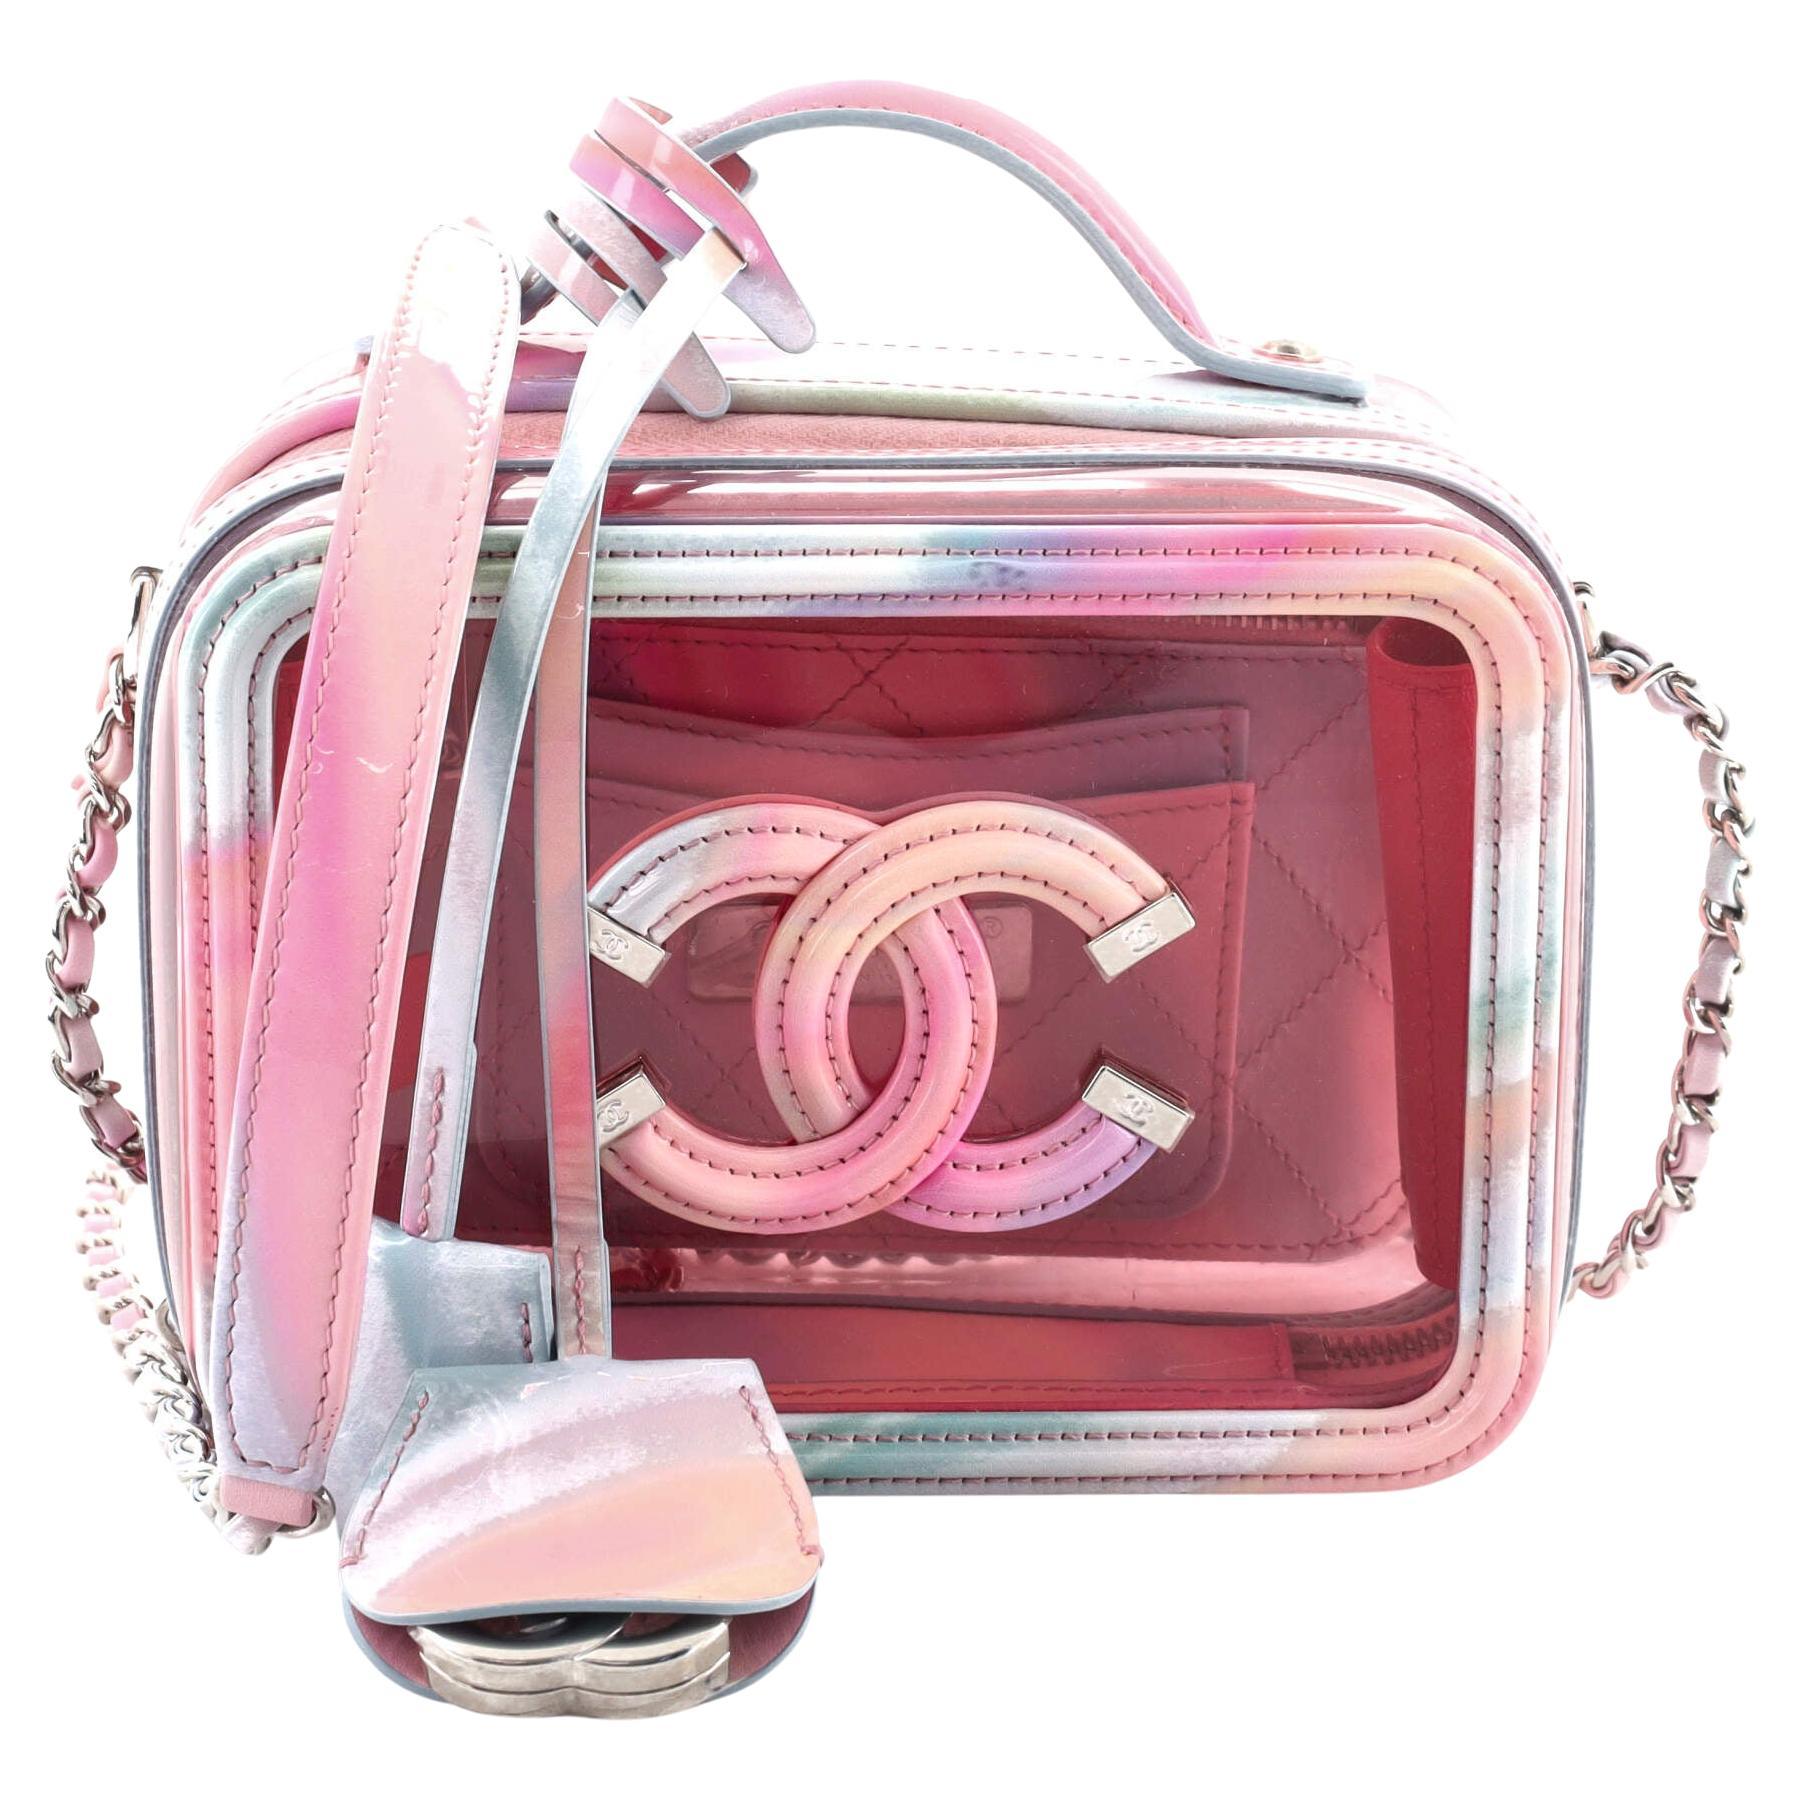 Chanel Pvc Vanity - For Sale on 1stDibs  chanel pvc vanity bag, chanel pvc  vanity case, pvc chanel